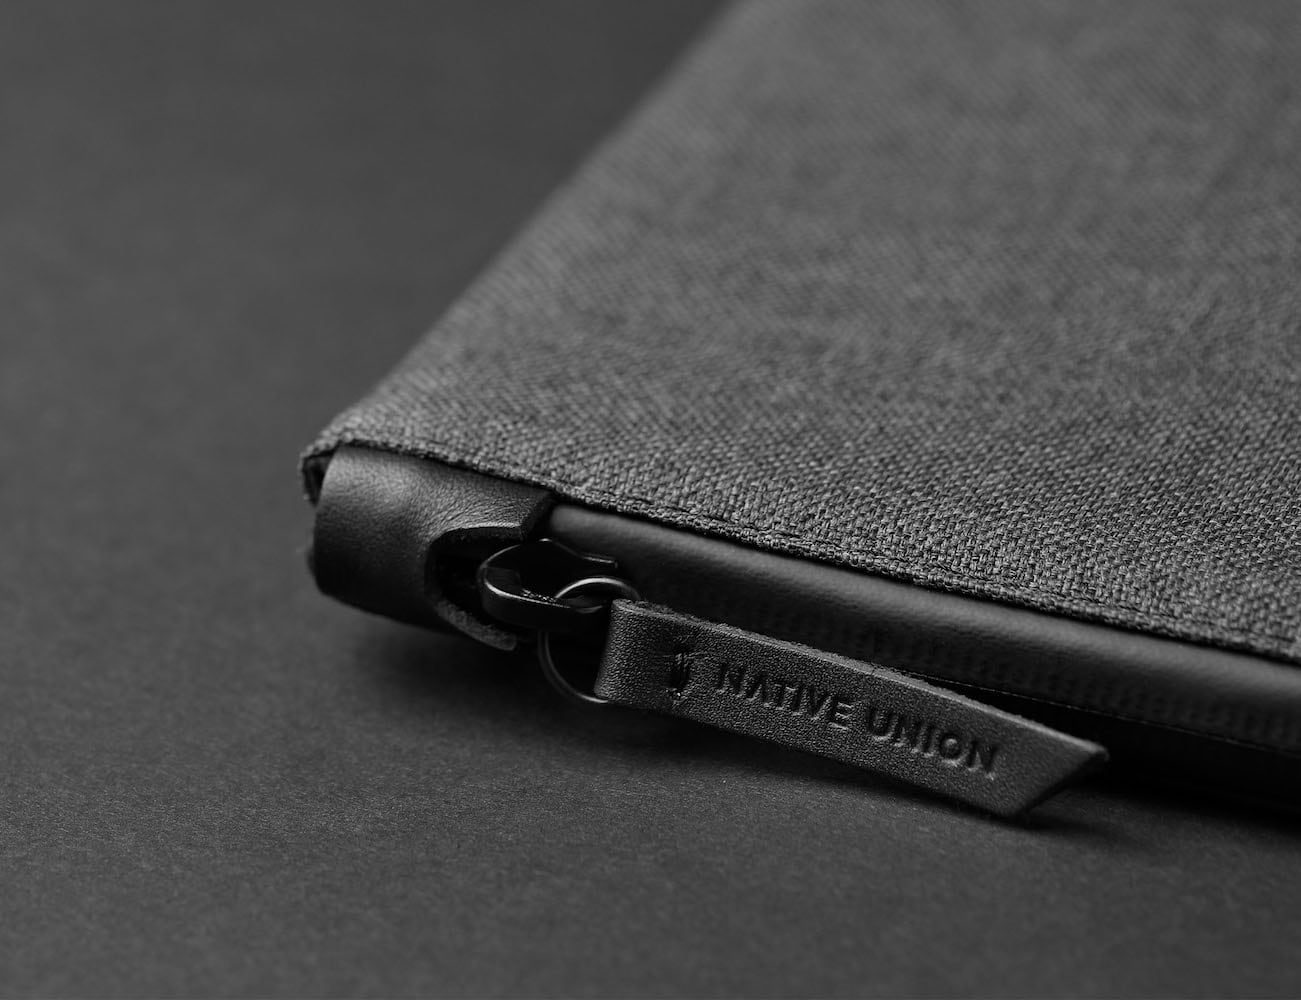 Native Union STOW premium MacBook sleeve holds your laptop with class